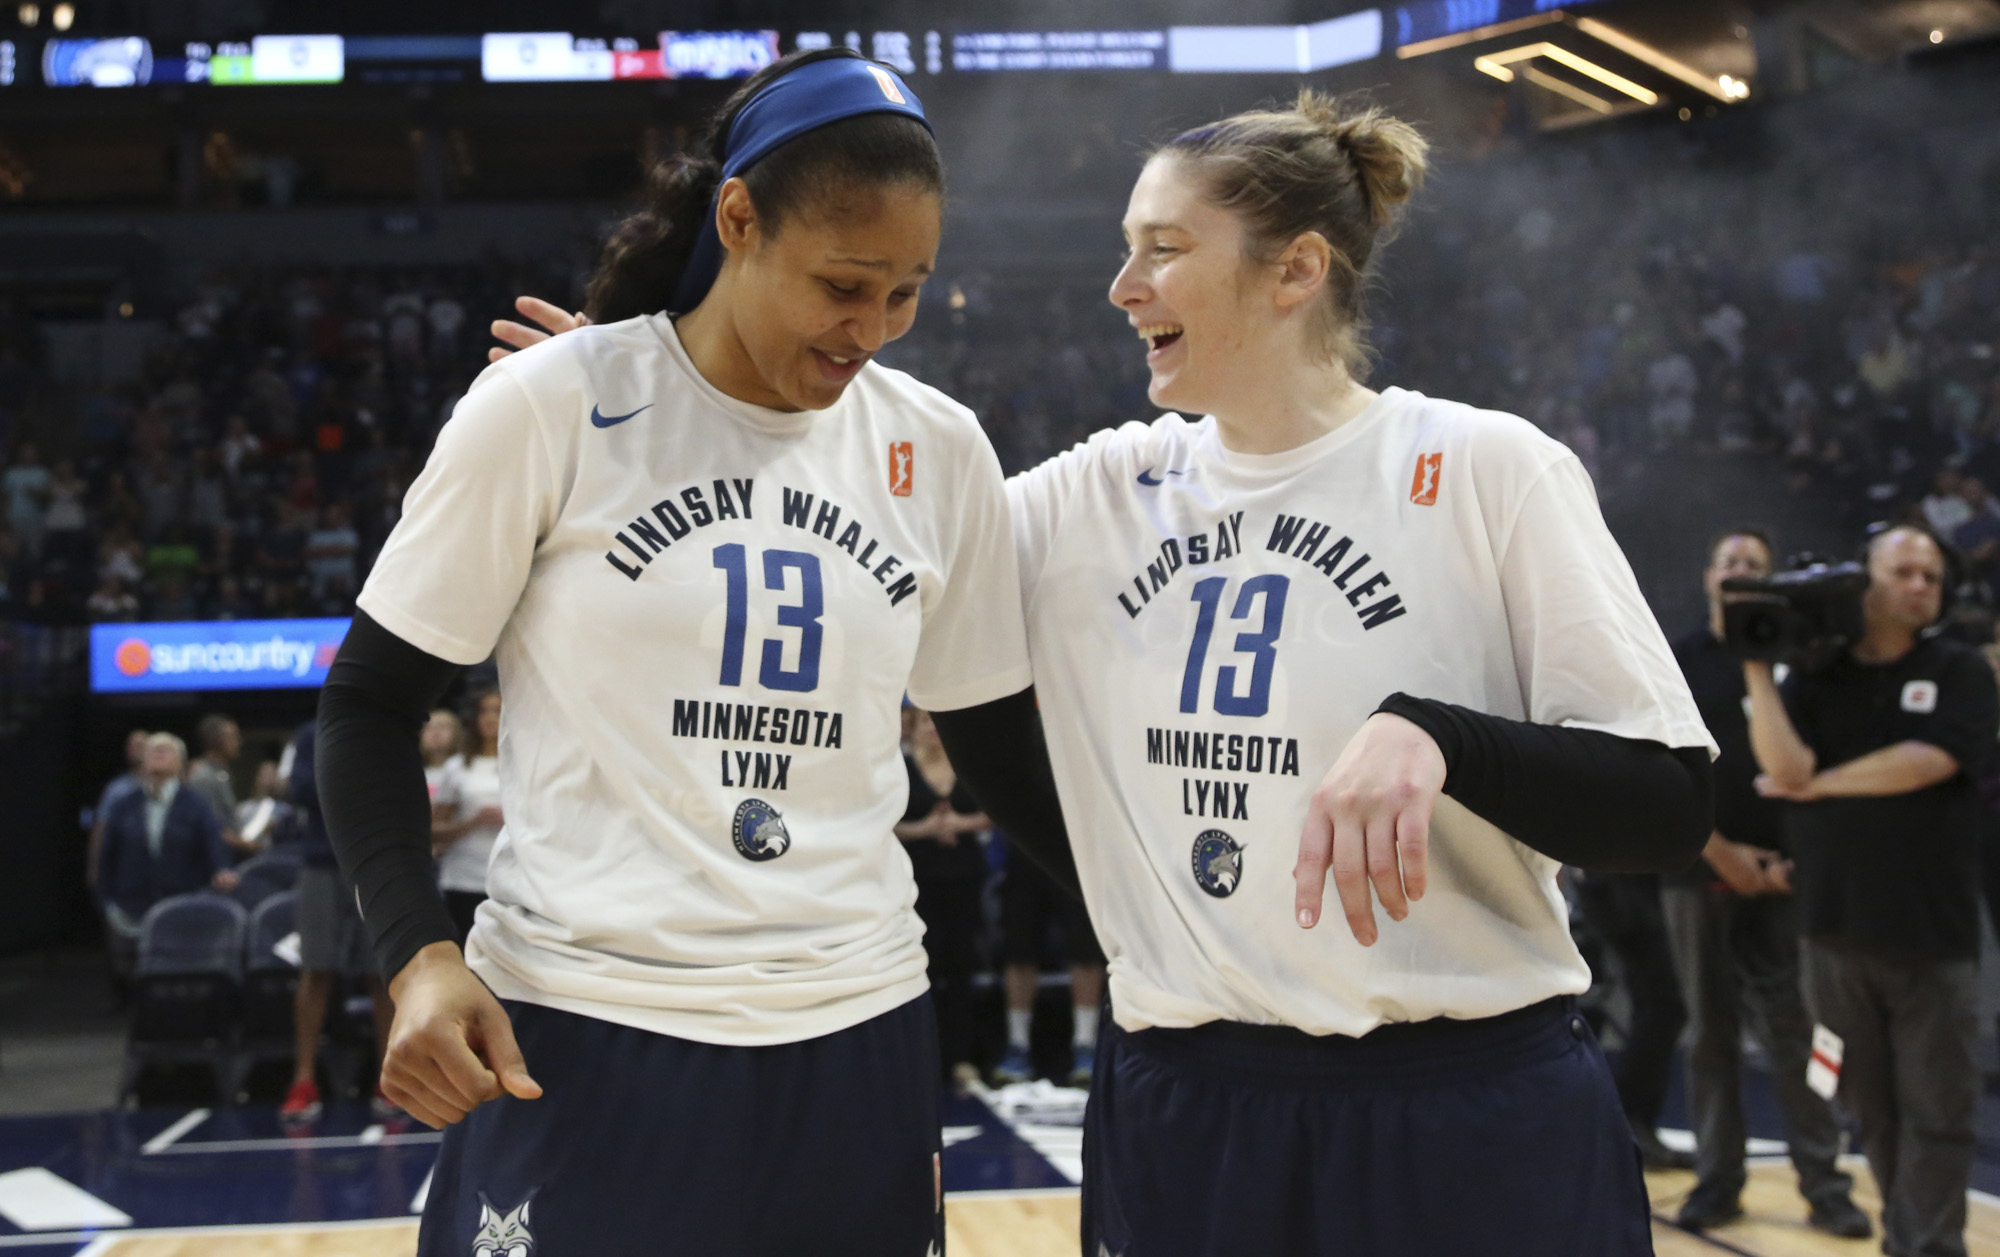 Maya Moore and Lindsay Whalen joked around with each other before the start of their last regular season game.